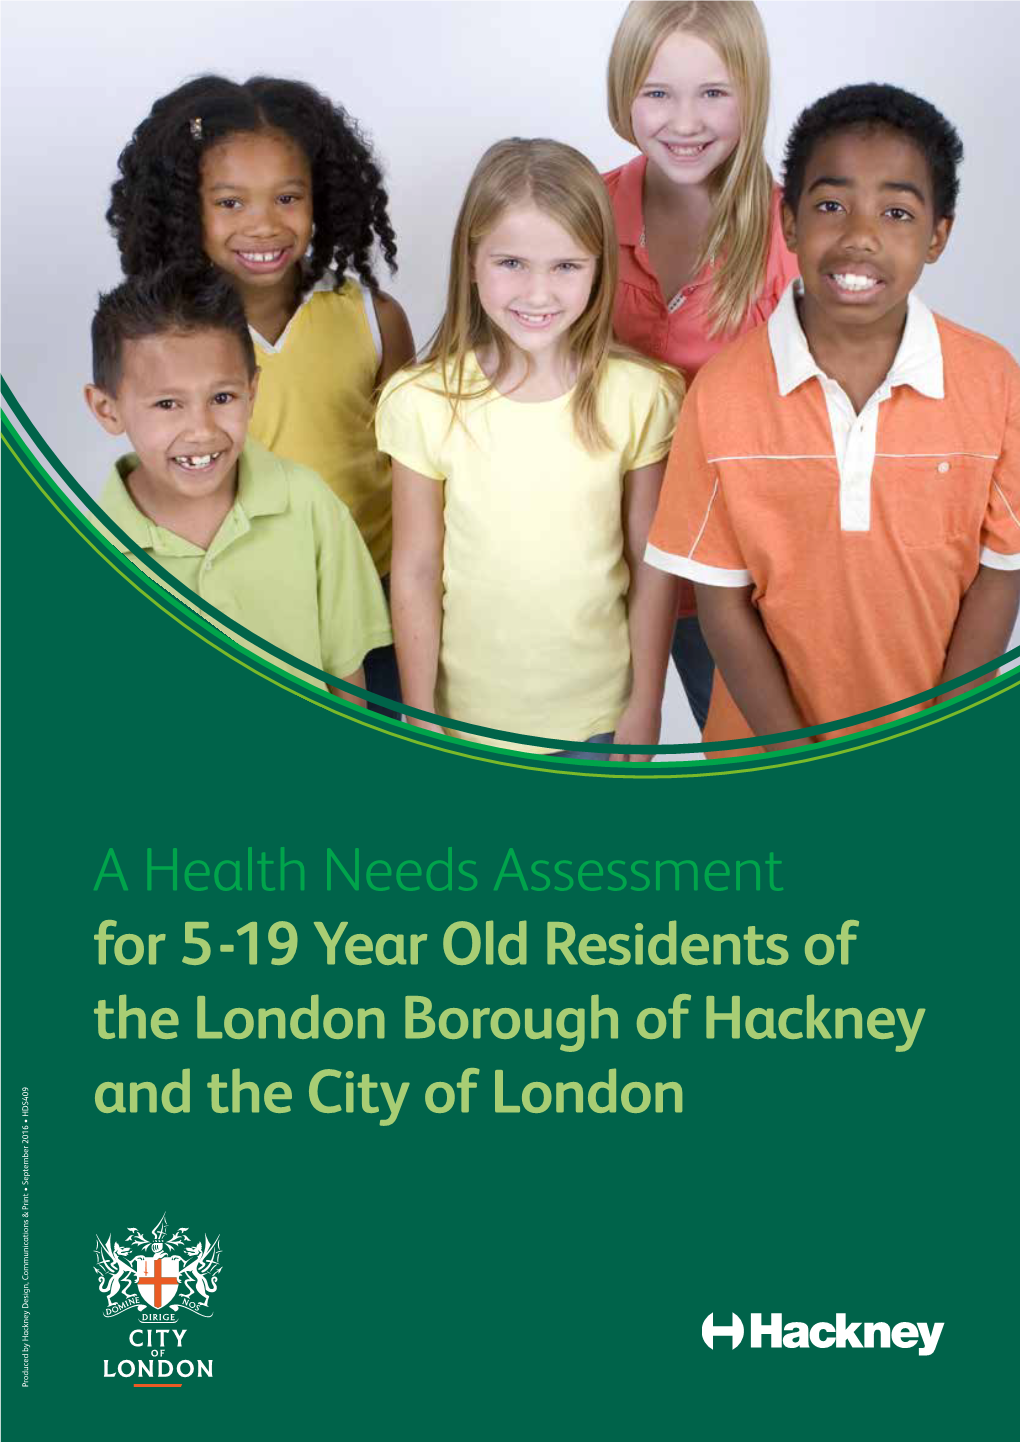 A Health Needs Assessment for 5-19 Year Old Residents of the London Borough of Hackney and the City of London